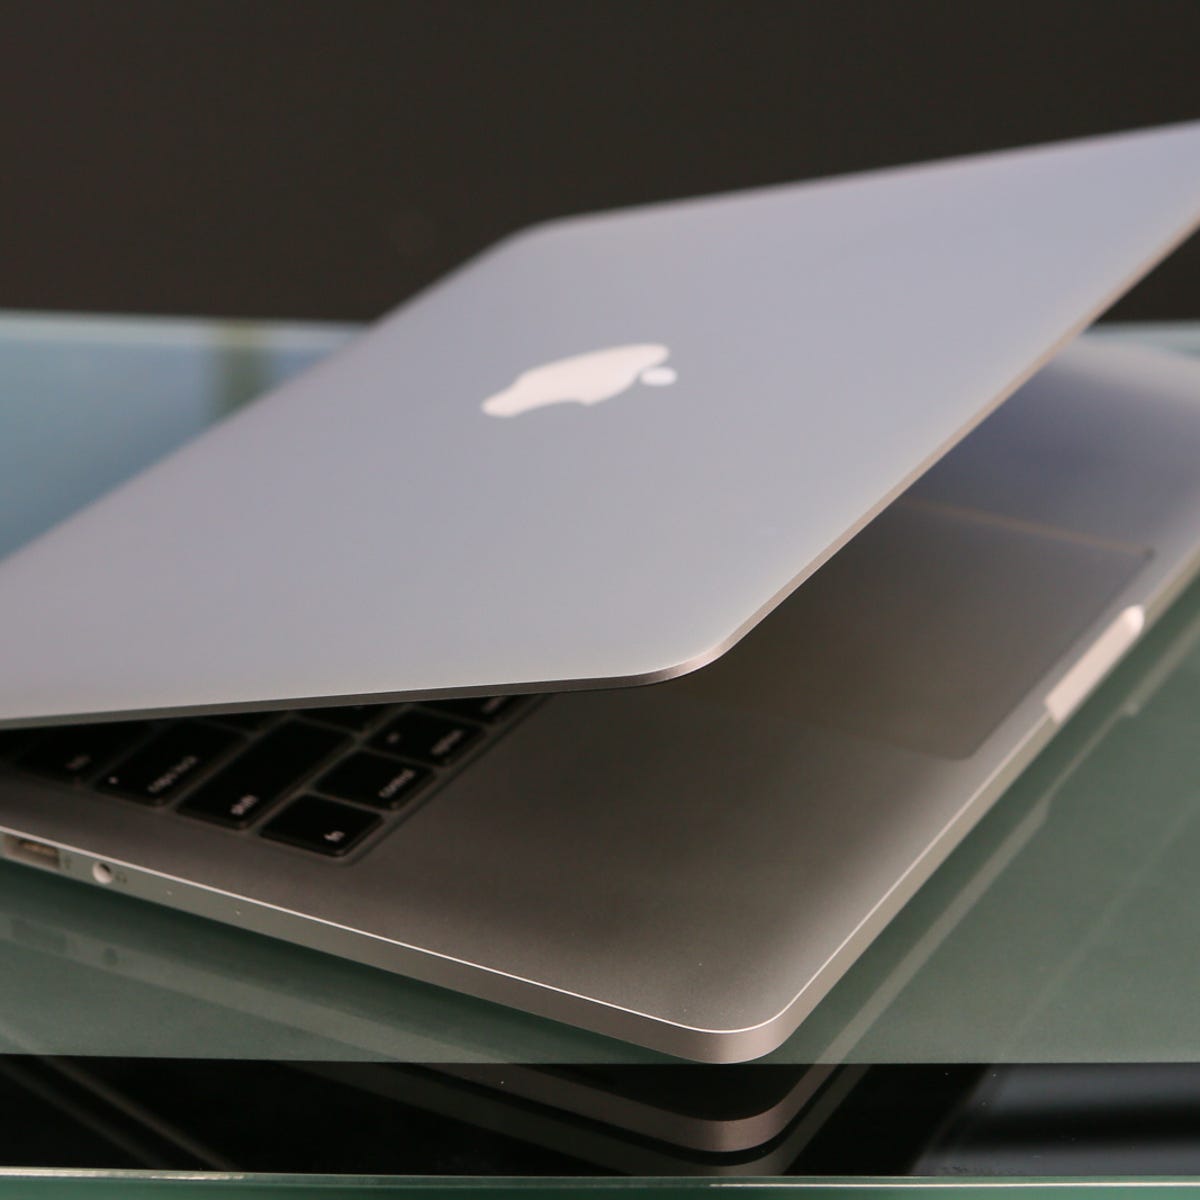 Apple MacBook Pro with Retina Display (13-inch, 2013) review: a Retina MacBook Air, but awfully close - CNET